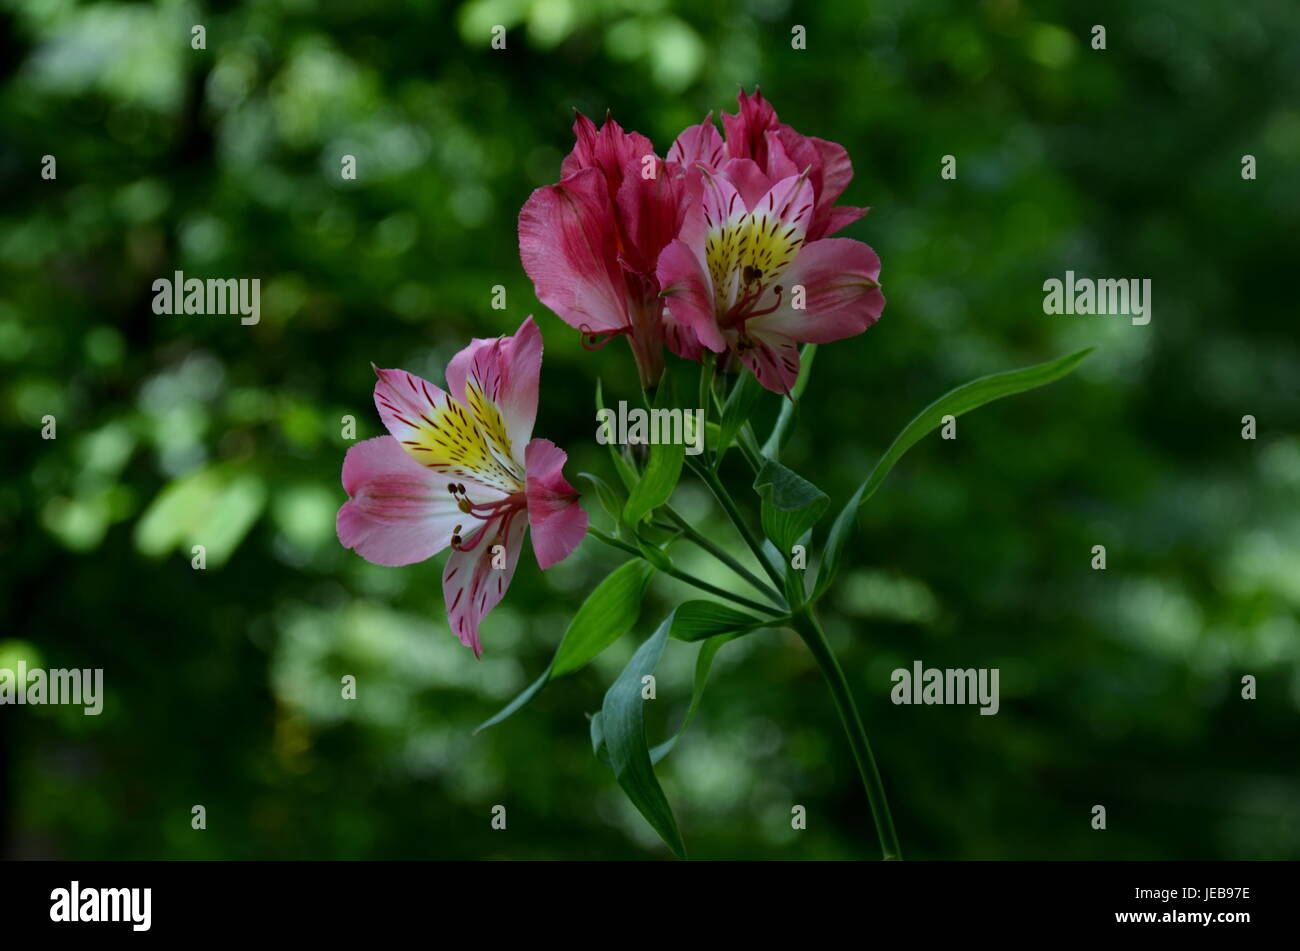 Pink alstroemeria flowers in the green natural background,  Sofia, Bulgaria Stock Photo